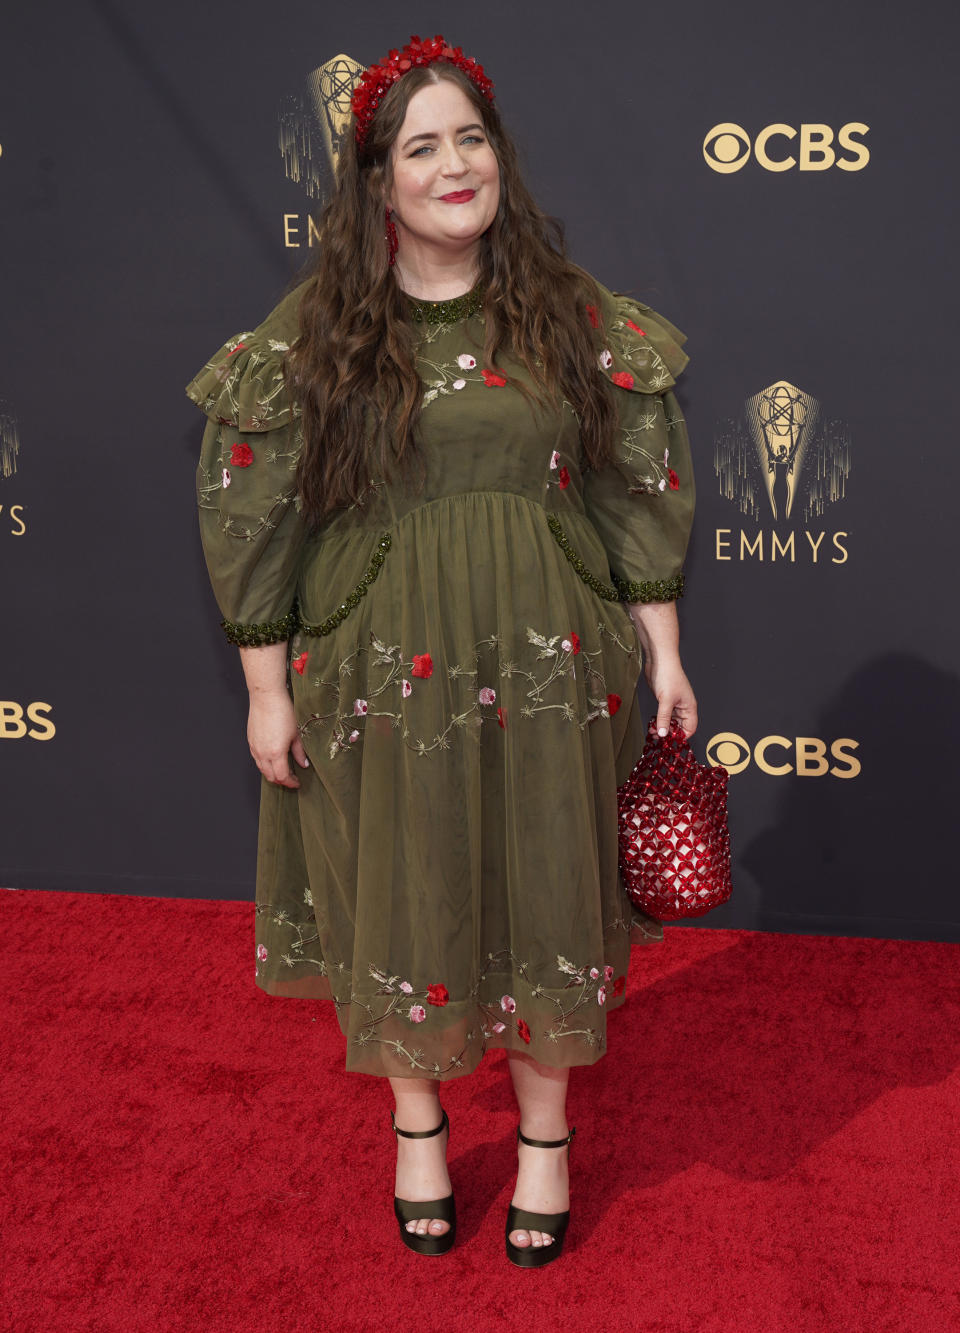 Aidy Bryant arrives at the 73rd Primetime Emmy Awards on Sunday, Sept. 19, 2021, at L.A. Live in Los Angeles. (AP Photo/Chris Pizzello)